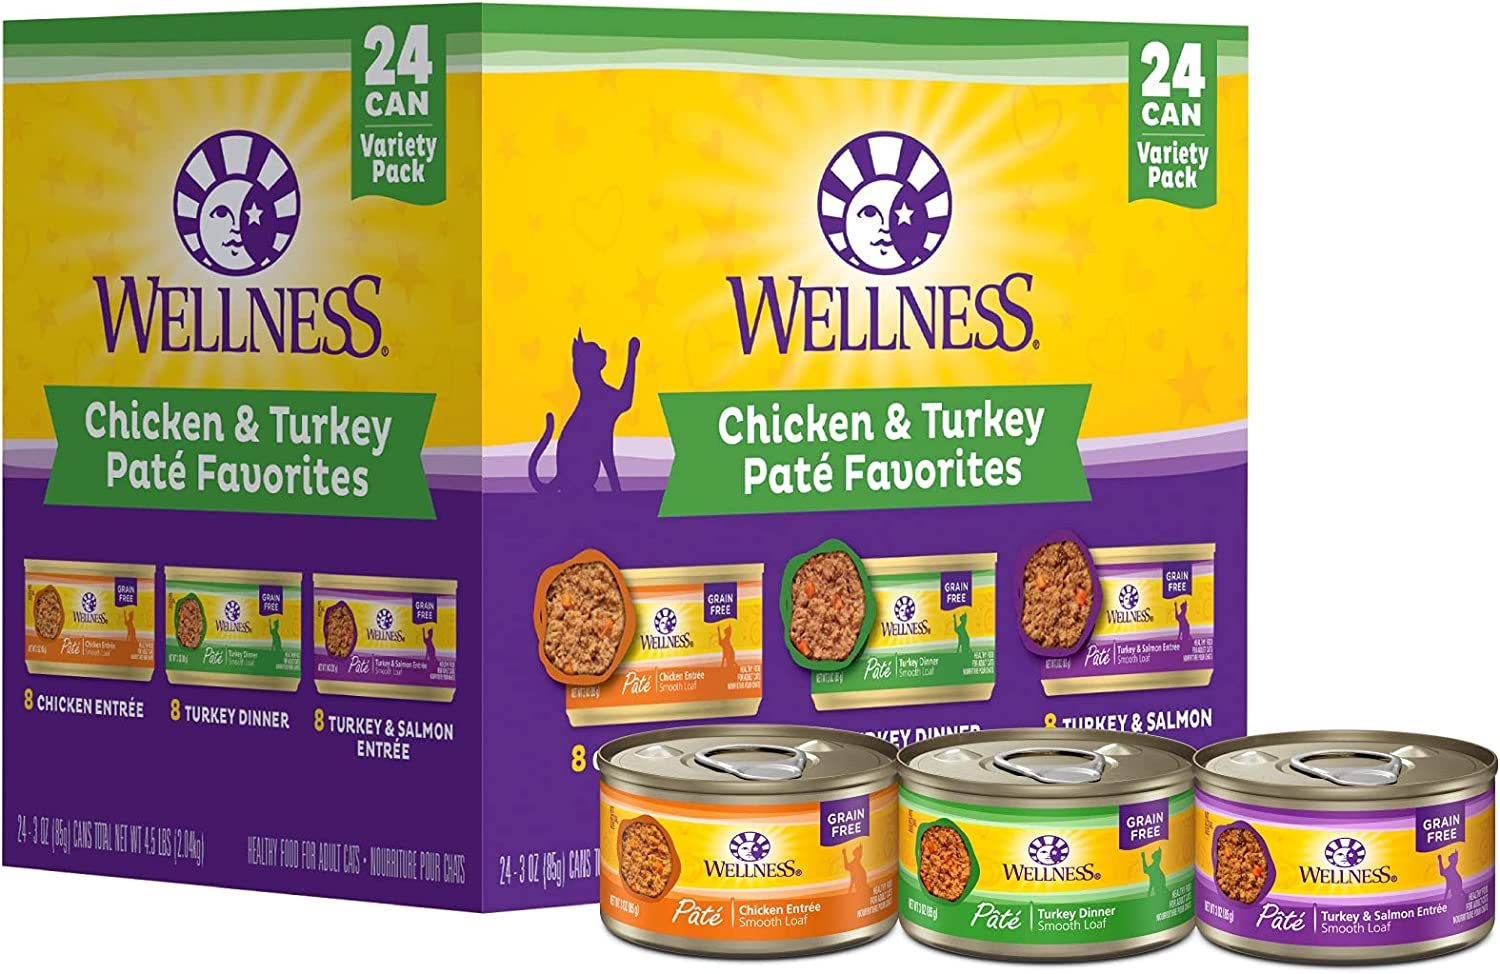 Wellness Complete Health Grain Free Wet Cat Food, Gravies & Pate, Natural Cat Food, Cat Food, Adult, Healthy, No Wheat, Corn, Soy, Artificial Flavors, Colors, Carrageenan or Preservatives